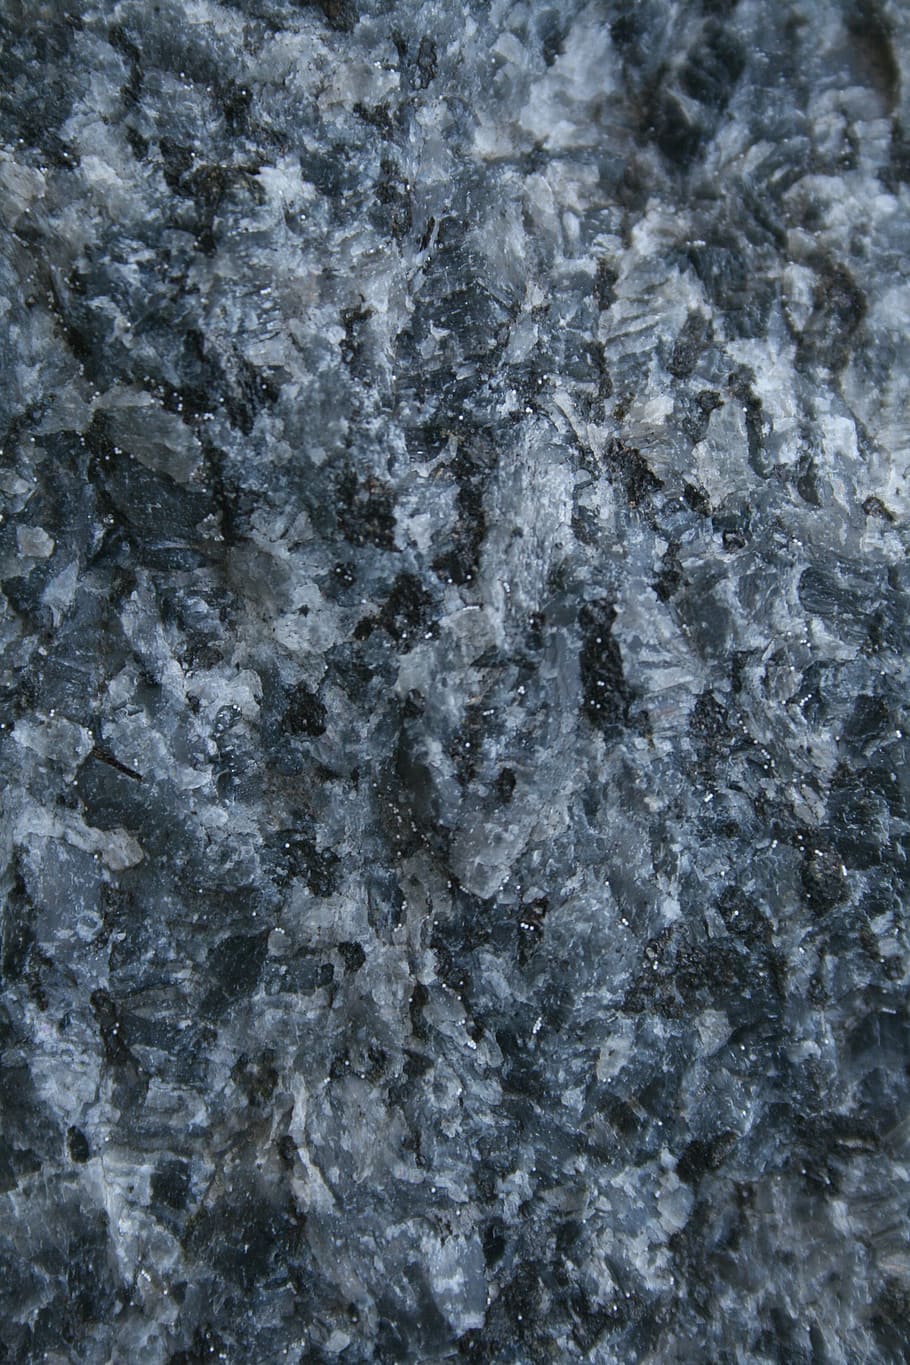 granite, texture, hard, backgrounds, full frame, textured, marbled effect, solid, rock - object, abstract backgrounds